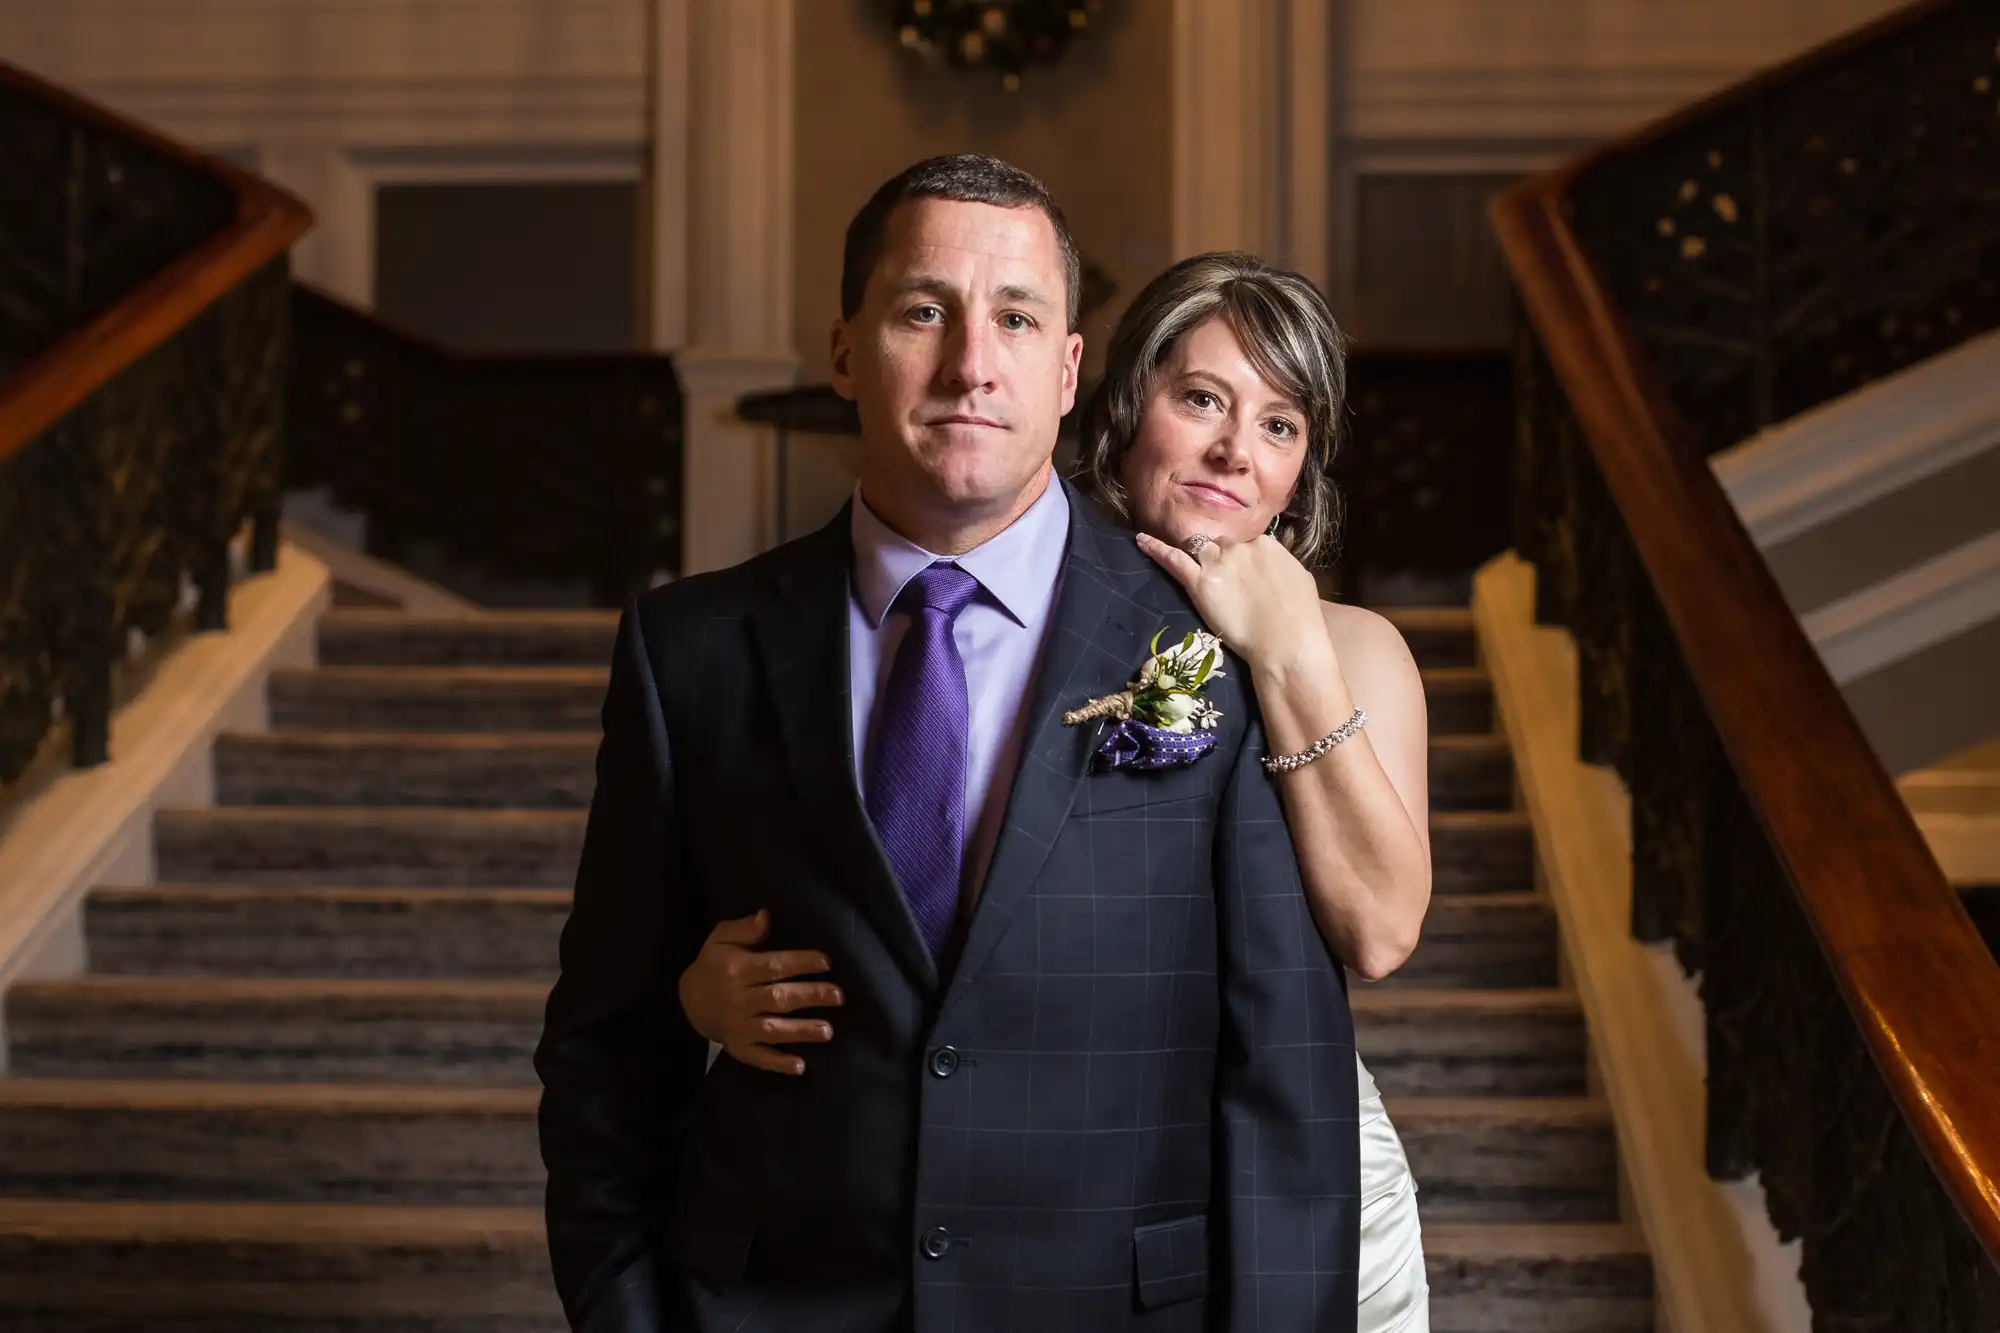 A couple dressed in formal attire stands in a grand hallway with staircases on either side, looking directly at the camera.